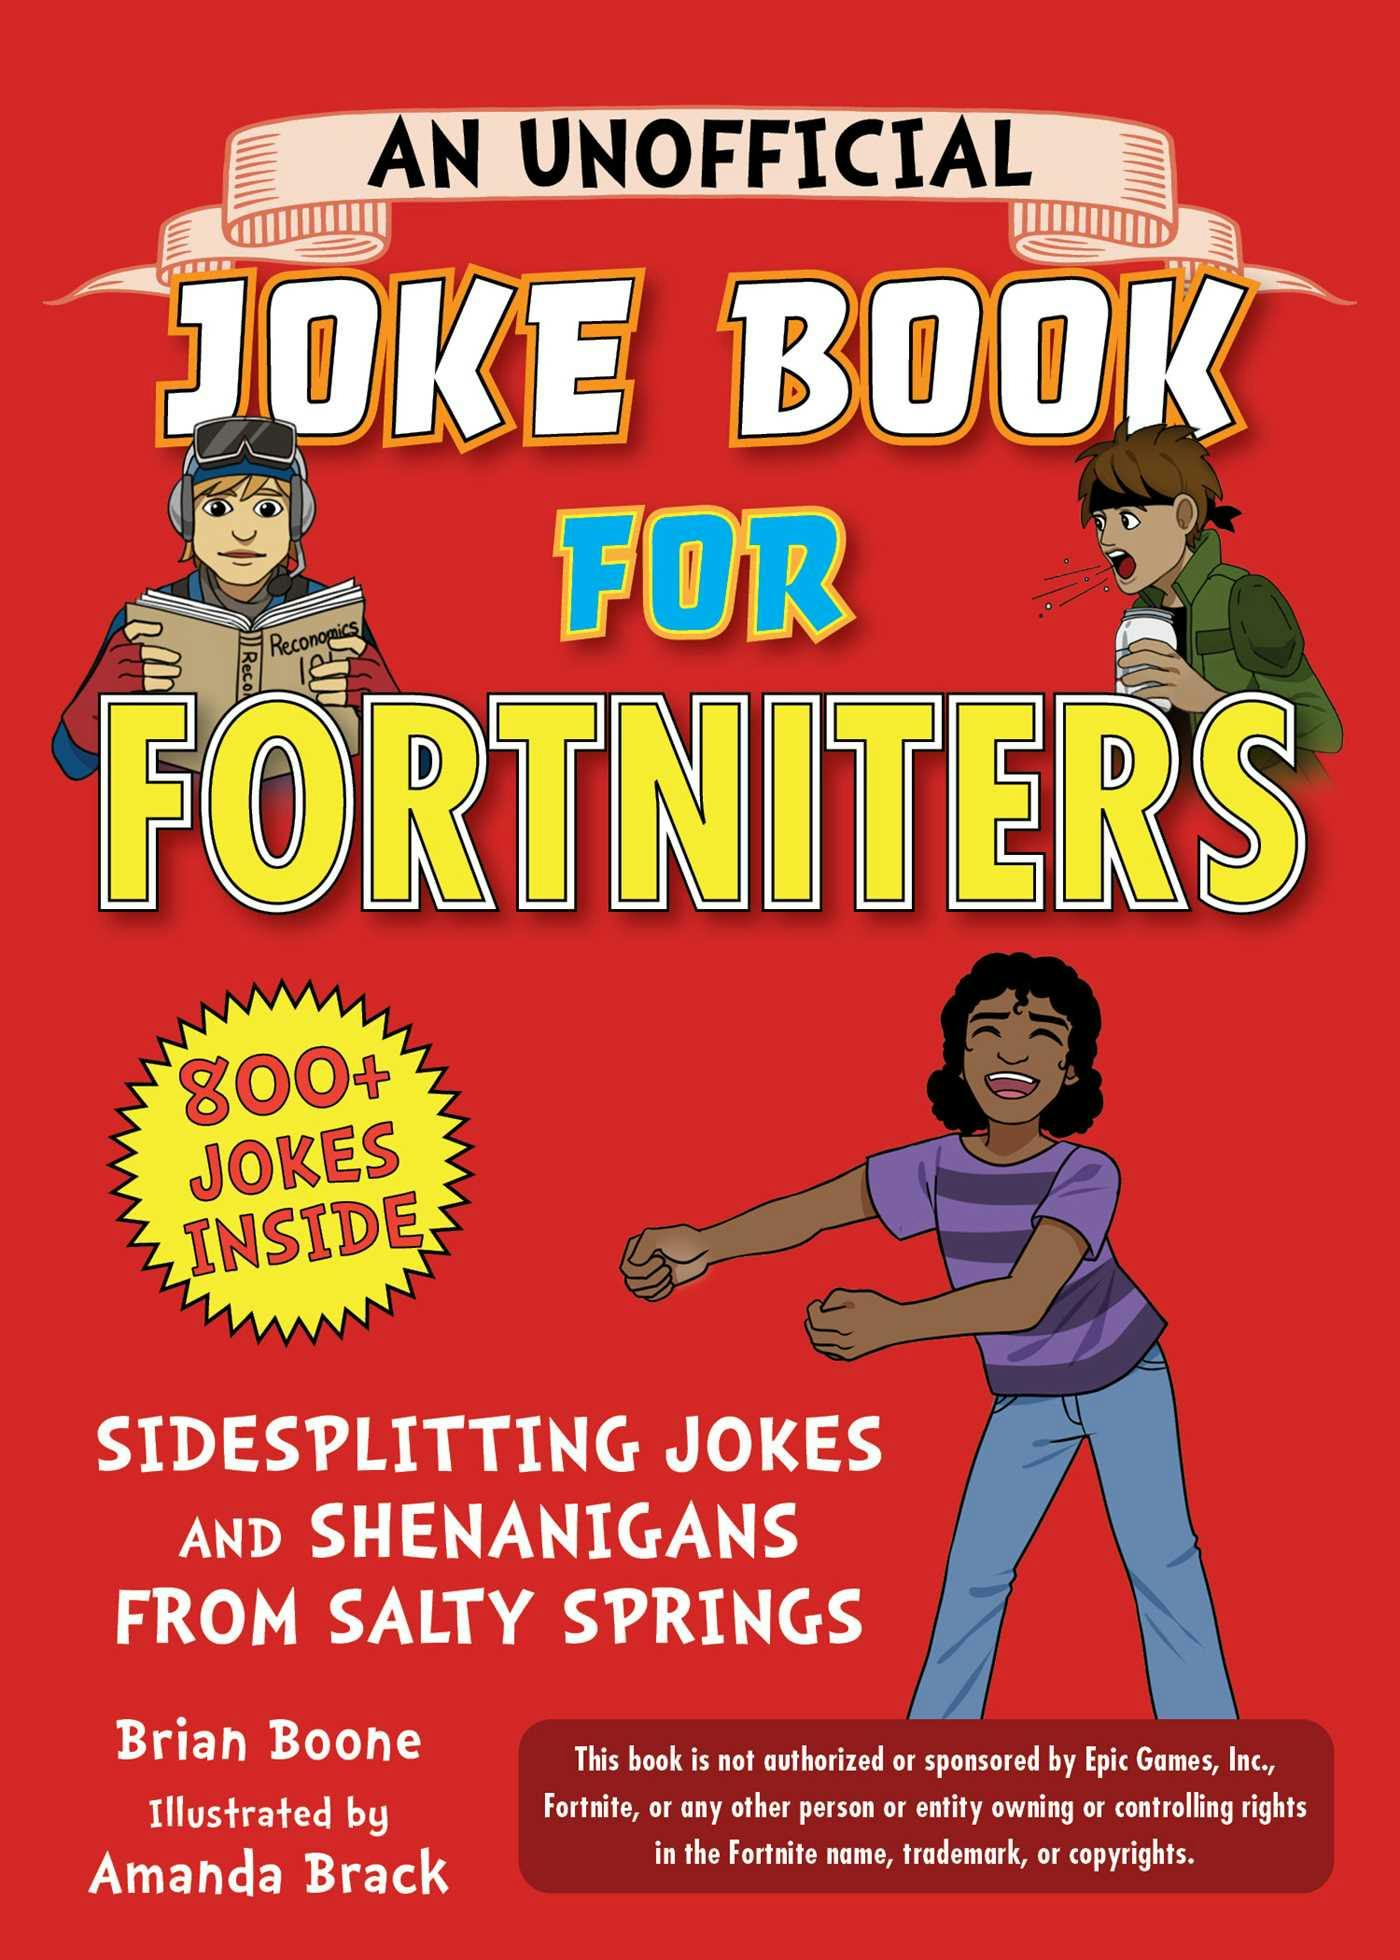 An Unofficial Joke Book for Fortniters: Sidesplitting Jokes and Shenanigans from Salty Springs - Brian Boone